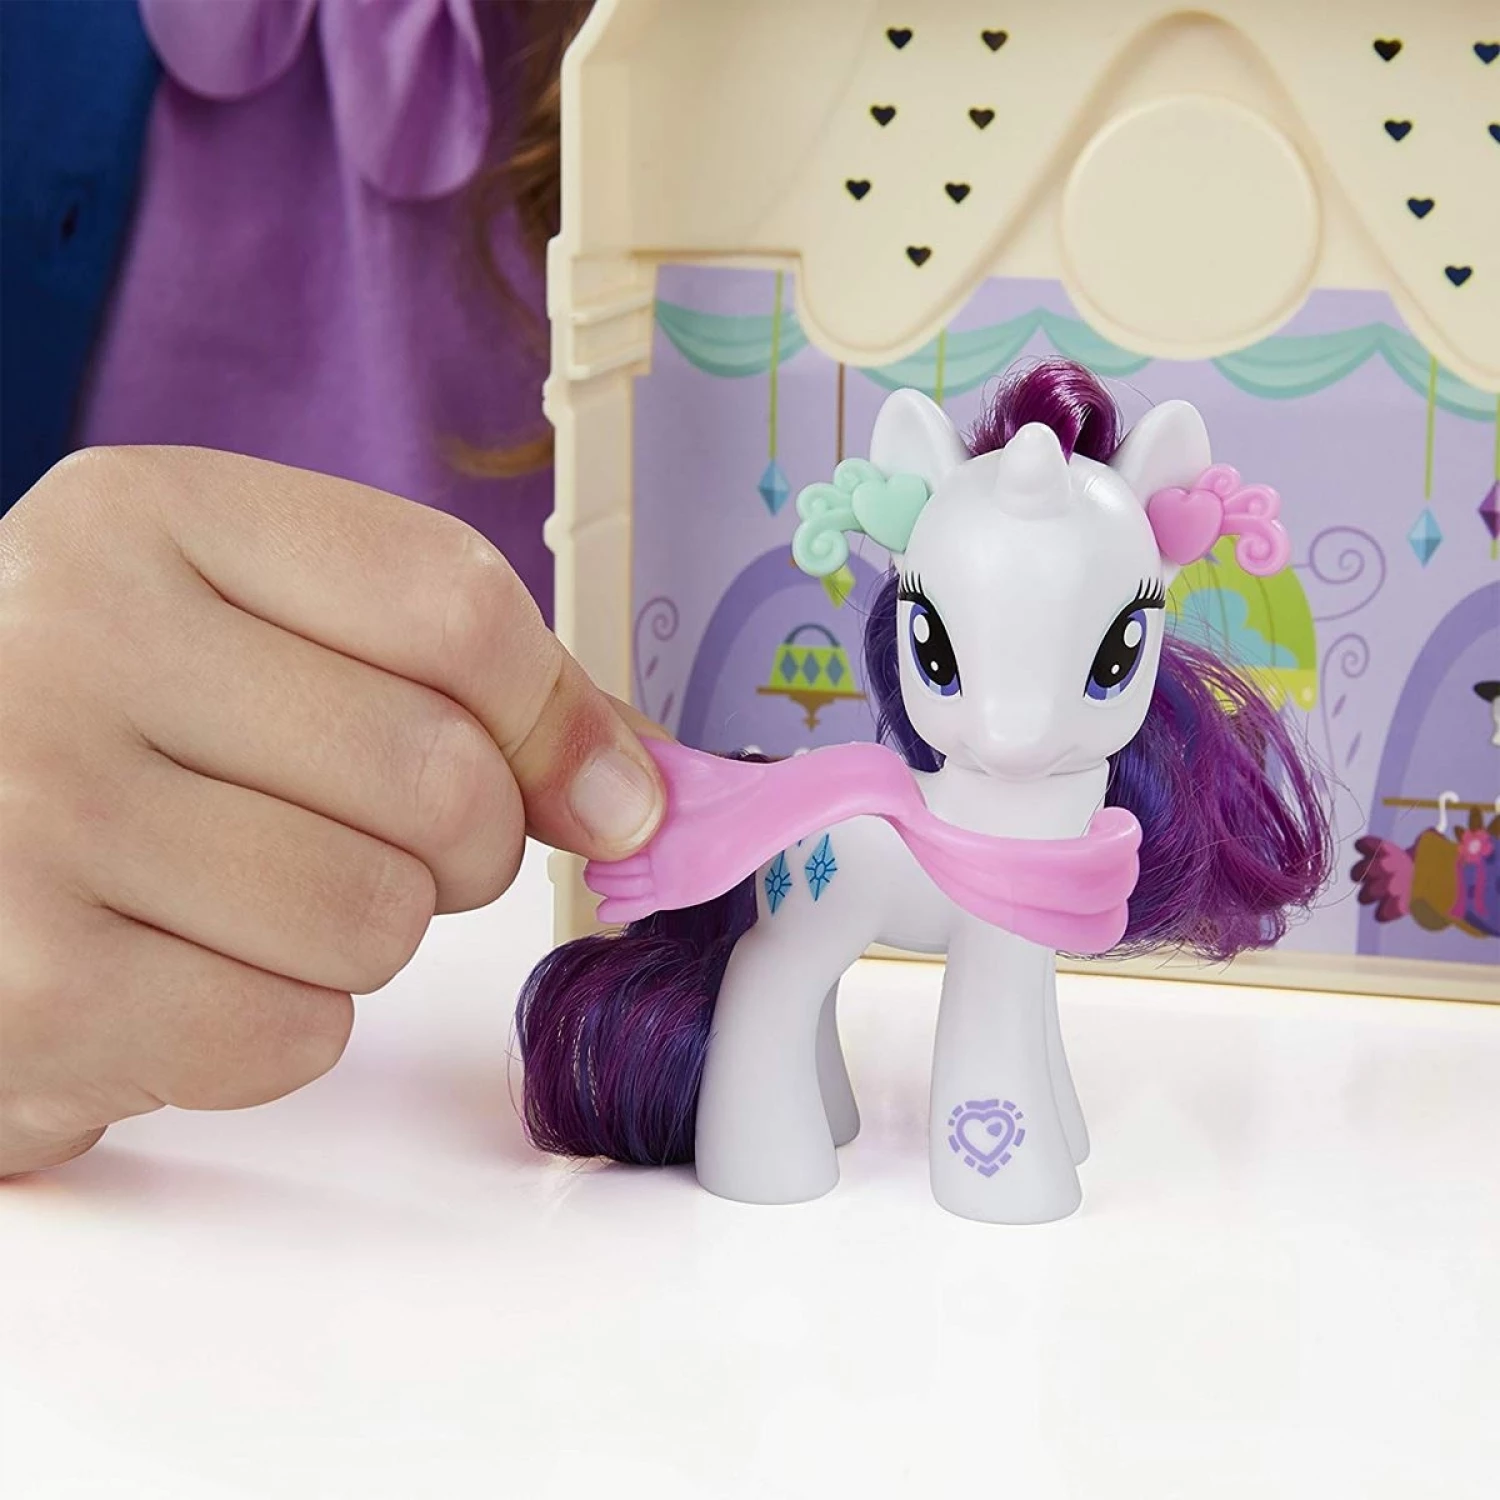 MY LITTLE PONY EXPLORE EQUESTRIA STORE&CARRY B5391